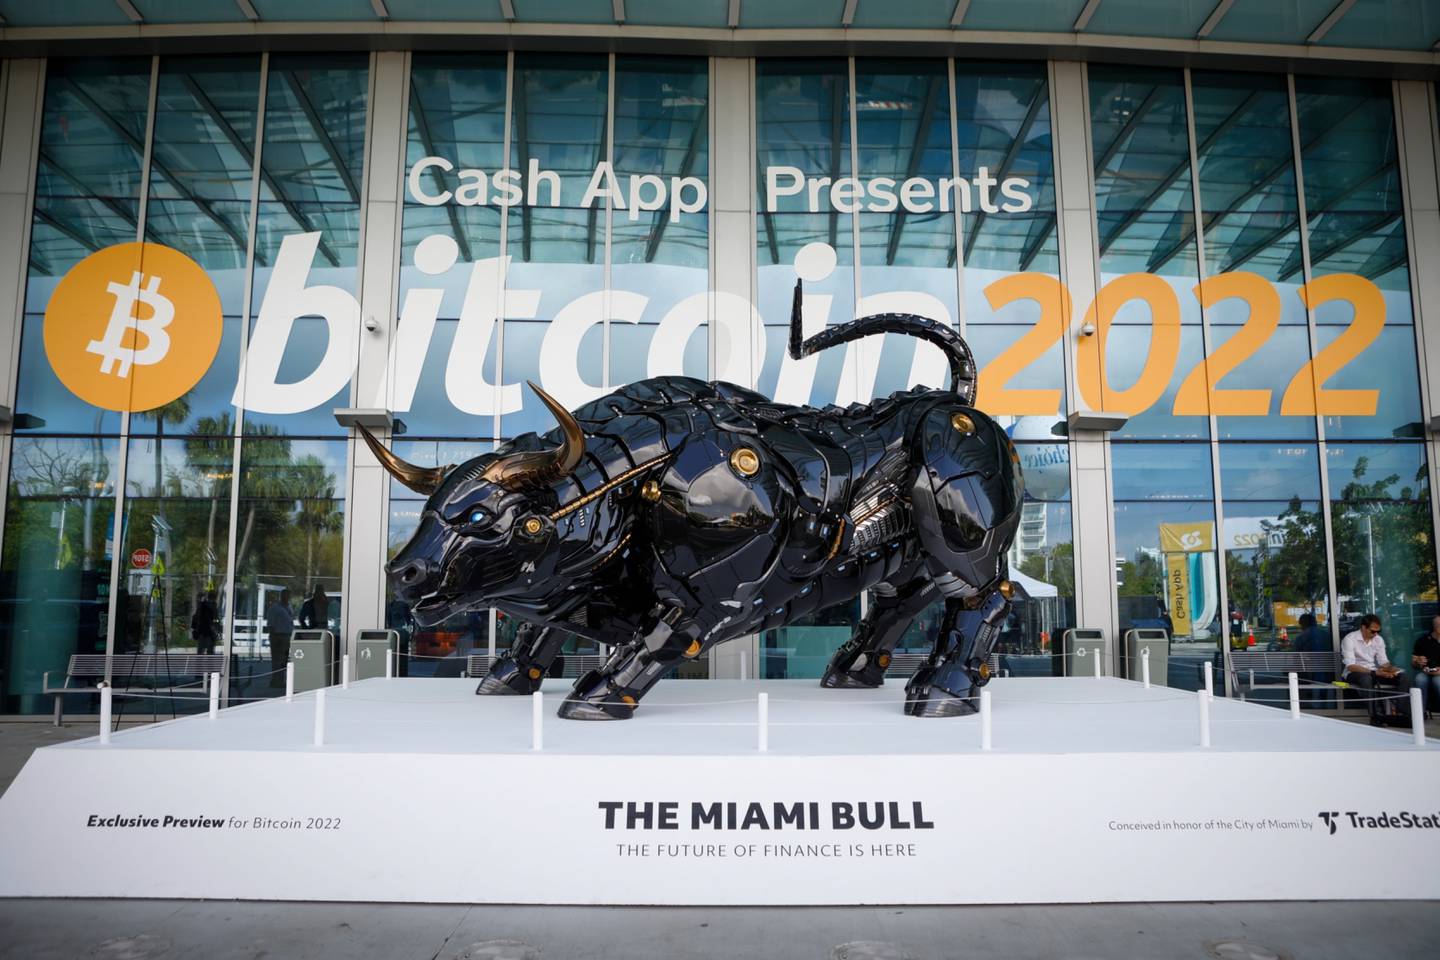 The Miami Bull, an 11-foot, 3,000-pound statue, outside the Miami Beach Convention Center during the Bitcoin 2022 conference in Miami.